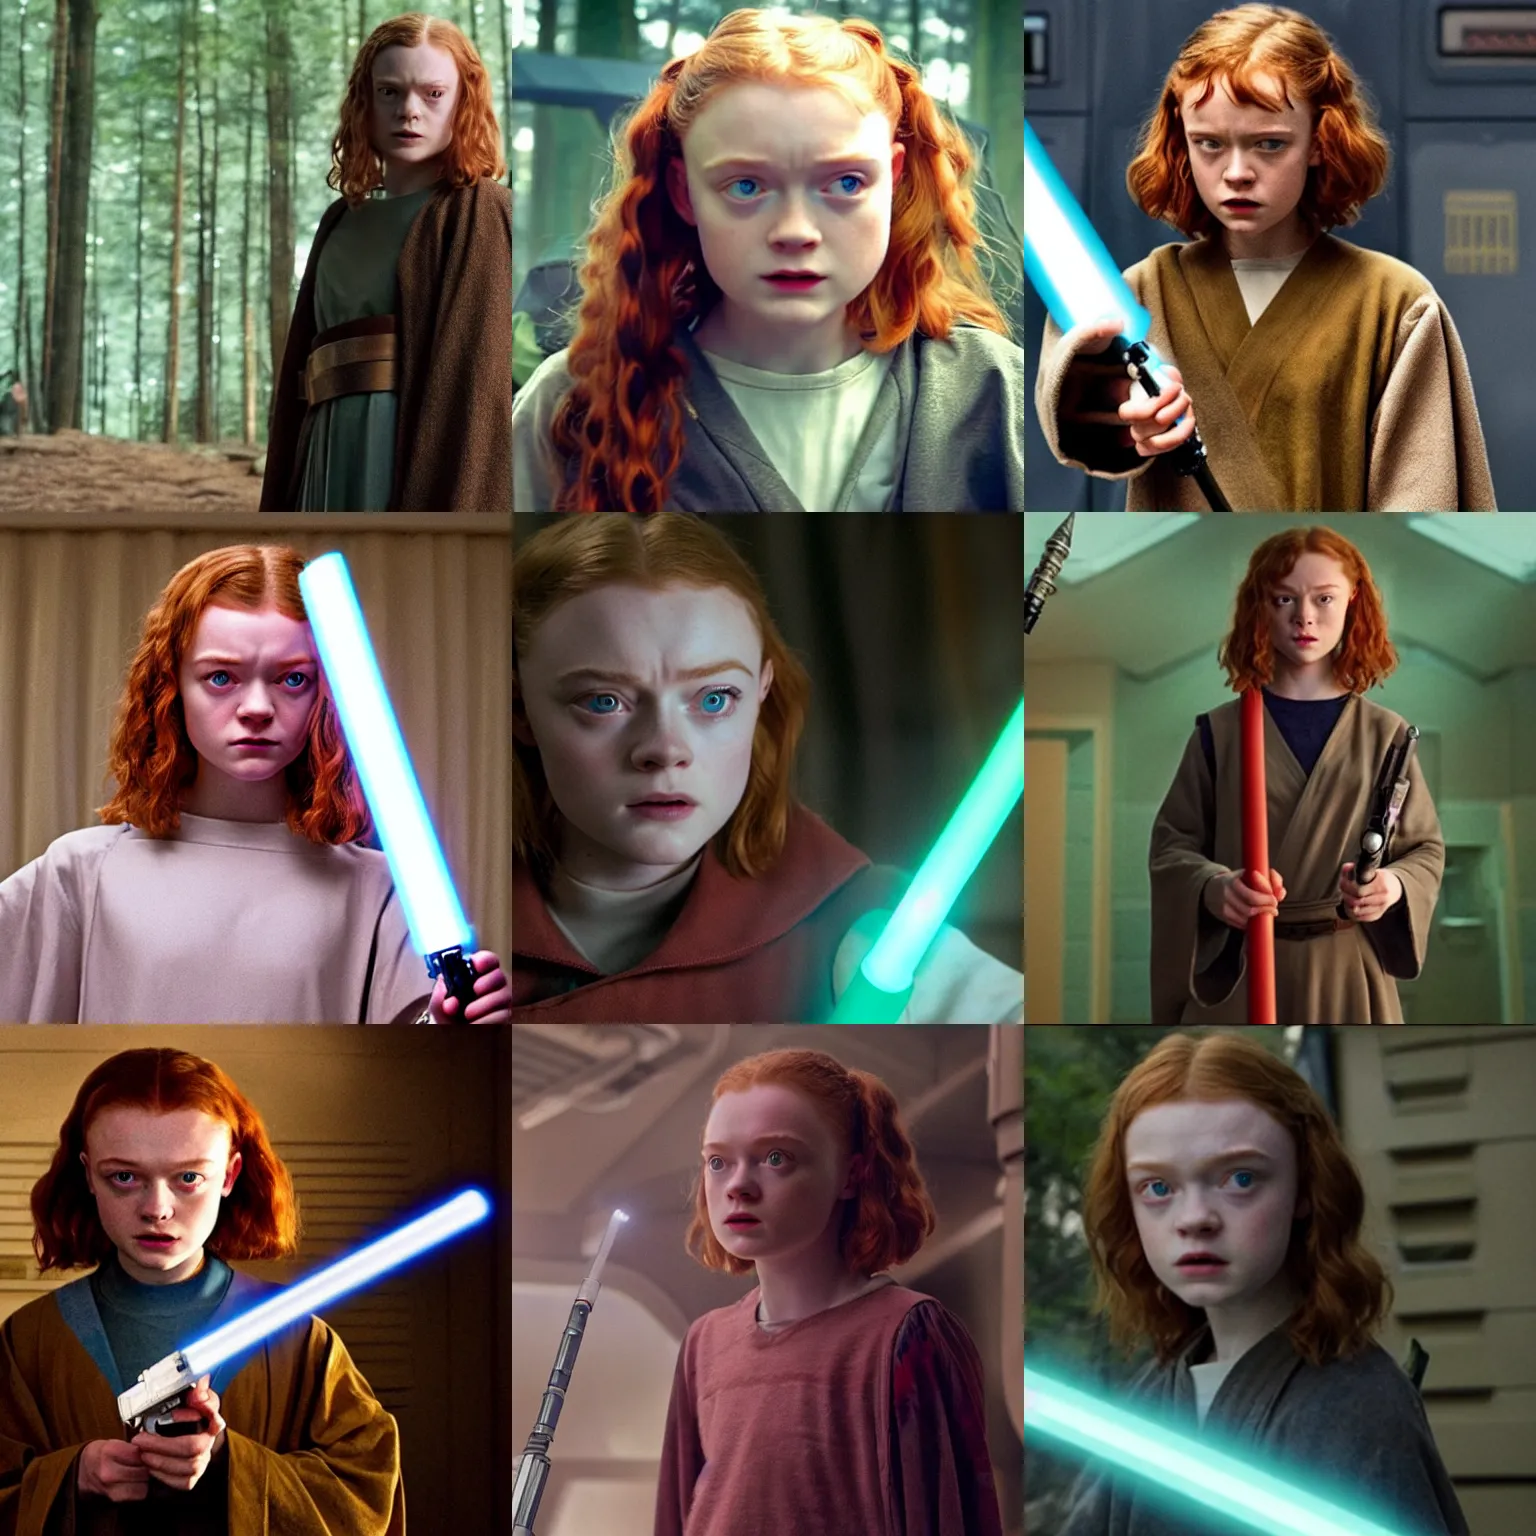 Prompt: Sadie Sink as a Jedi Master, with her lightsaber, tv still from Stranger Things